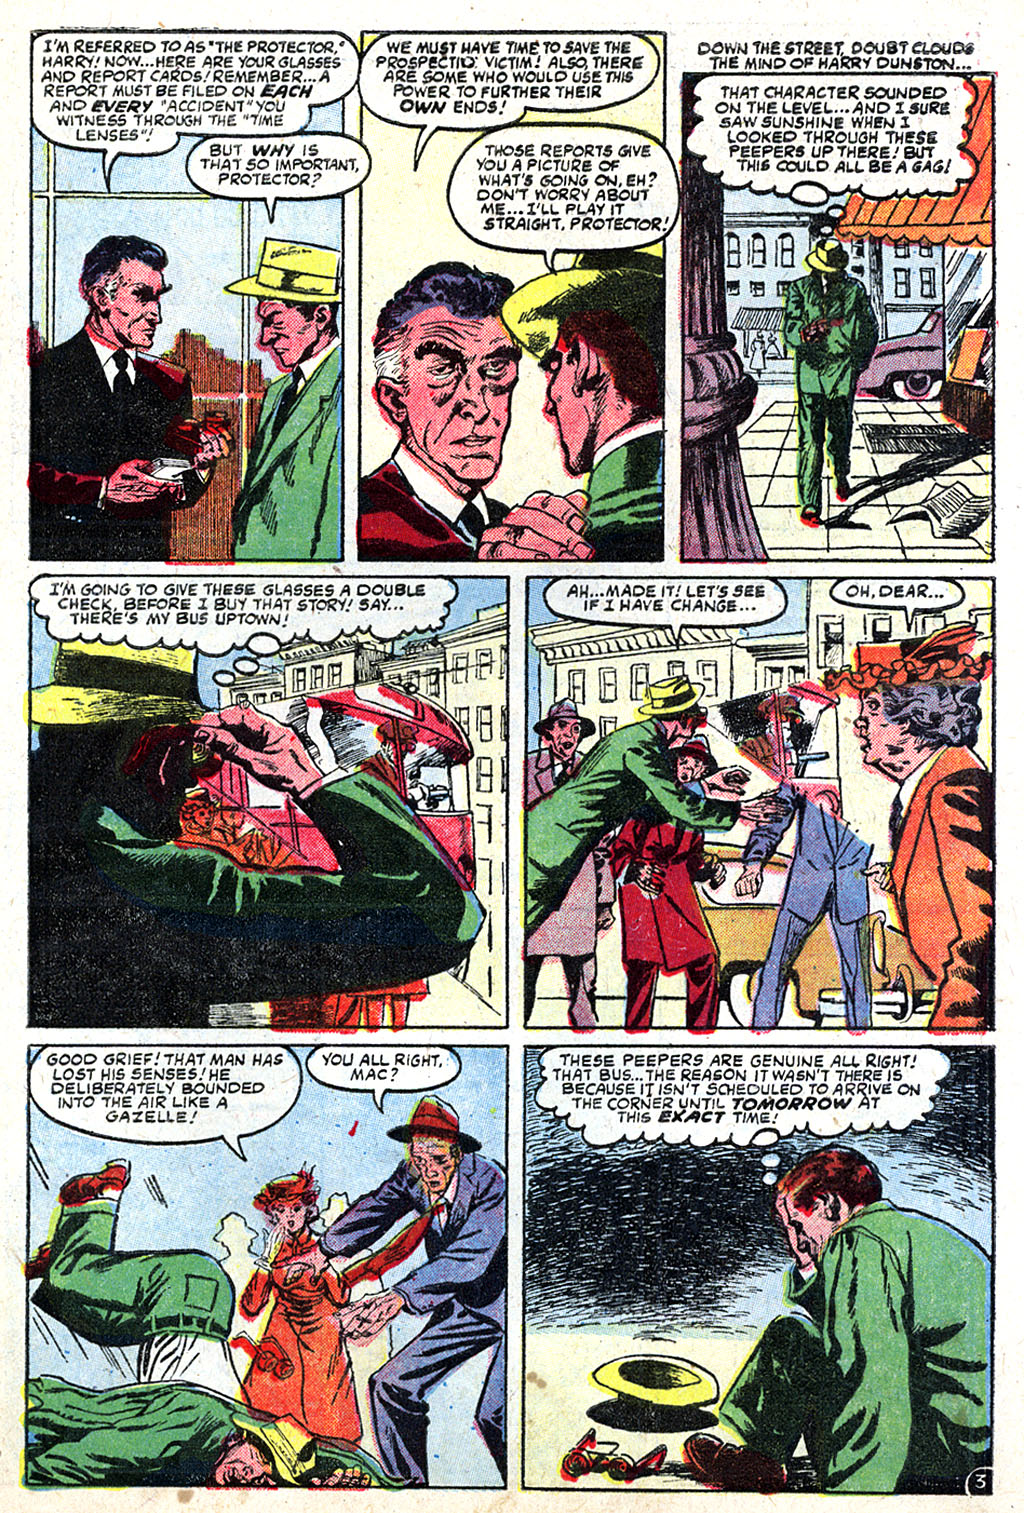 Marvel Tales (1949) 138 Page 4